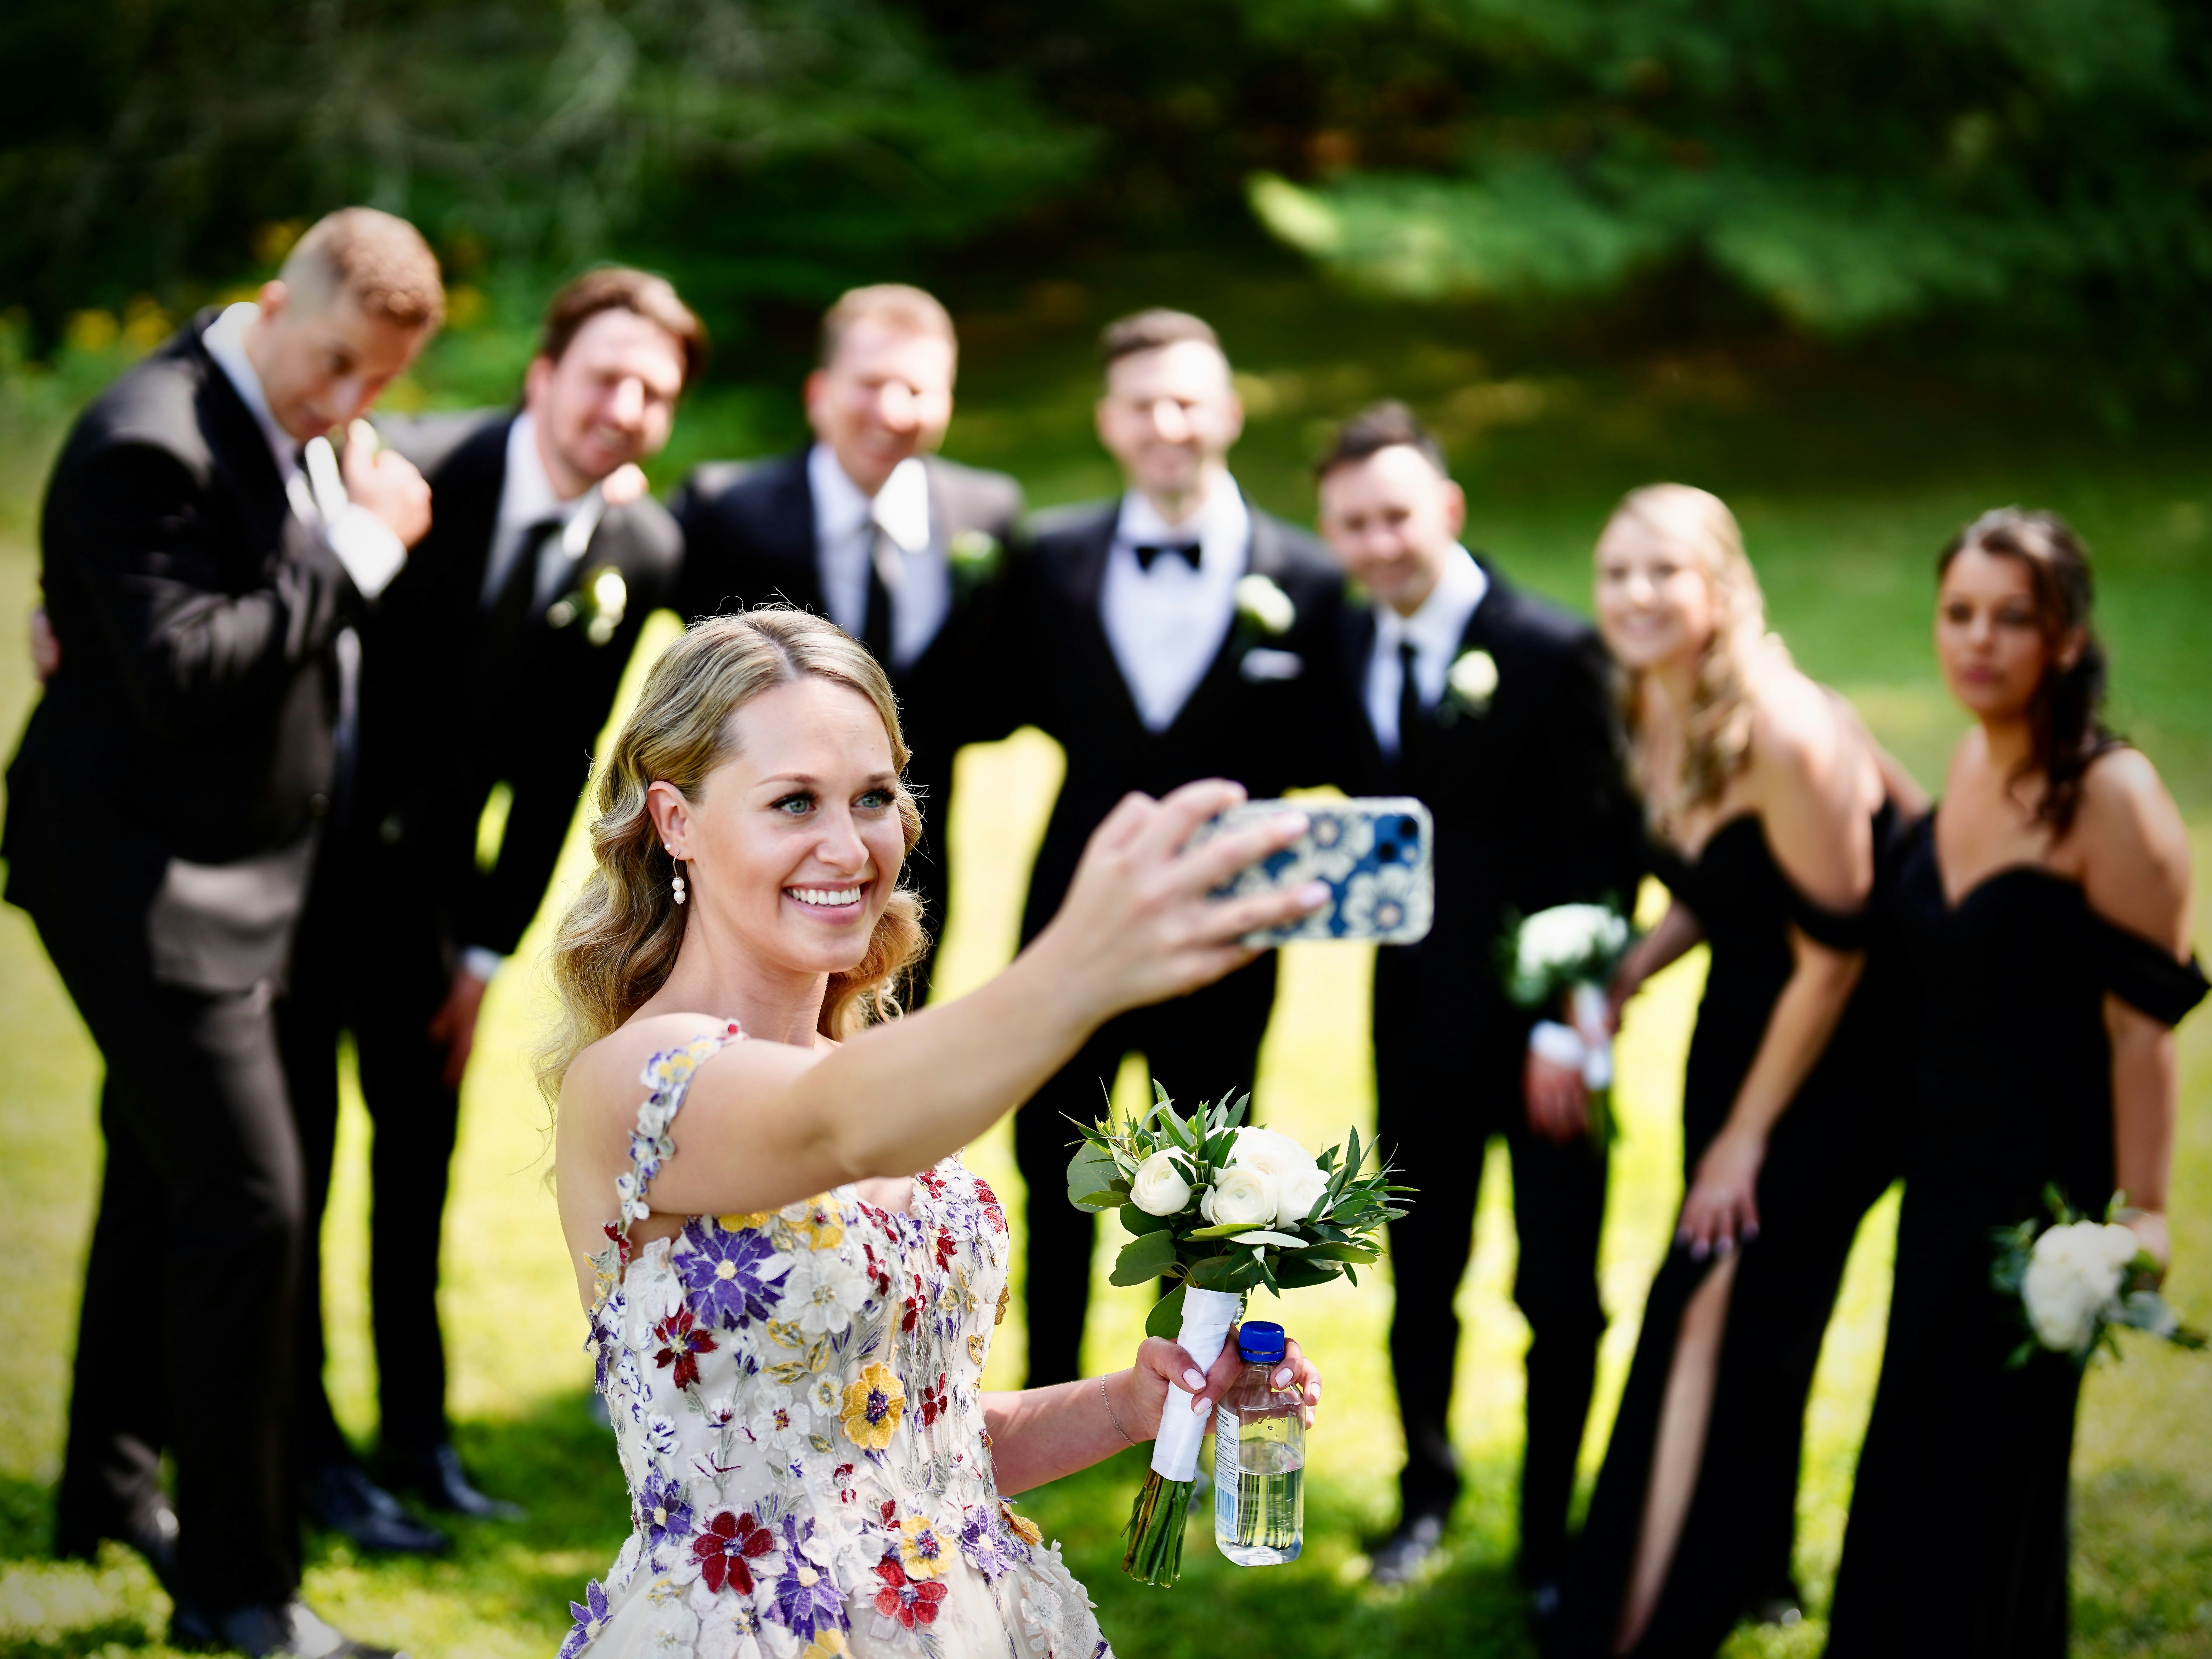 great photo recipe,how to photograph bridal squad selfie: a picture-perfect moment. grow as a photographer and reach your artistic goals with https://greatphotorecipes.com/